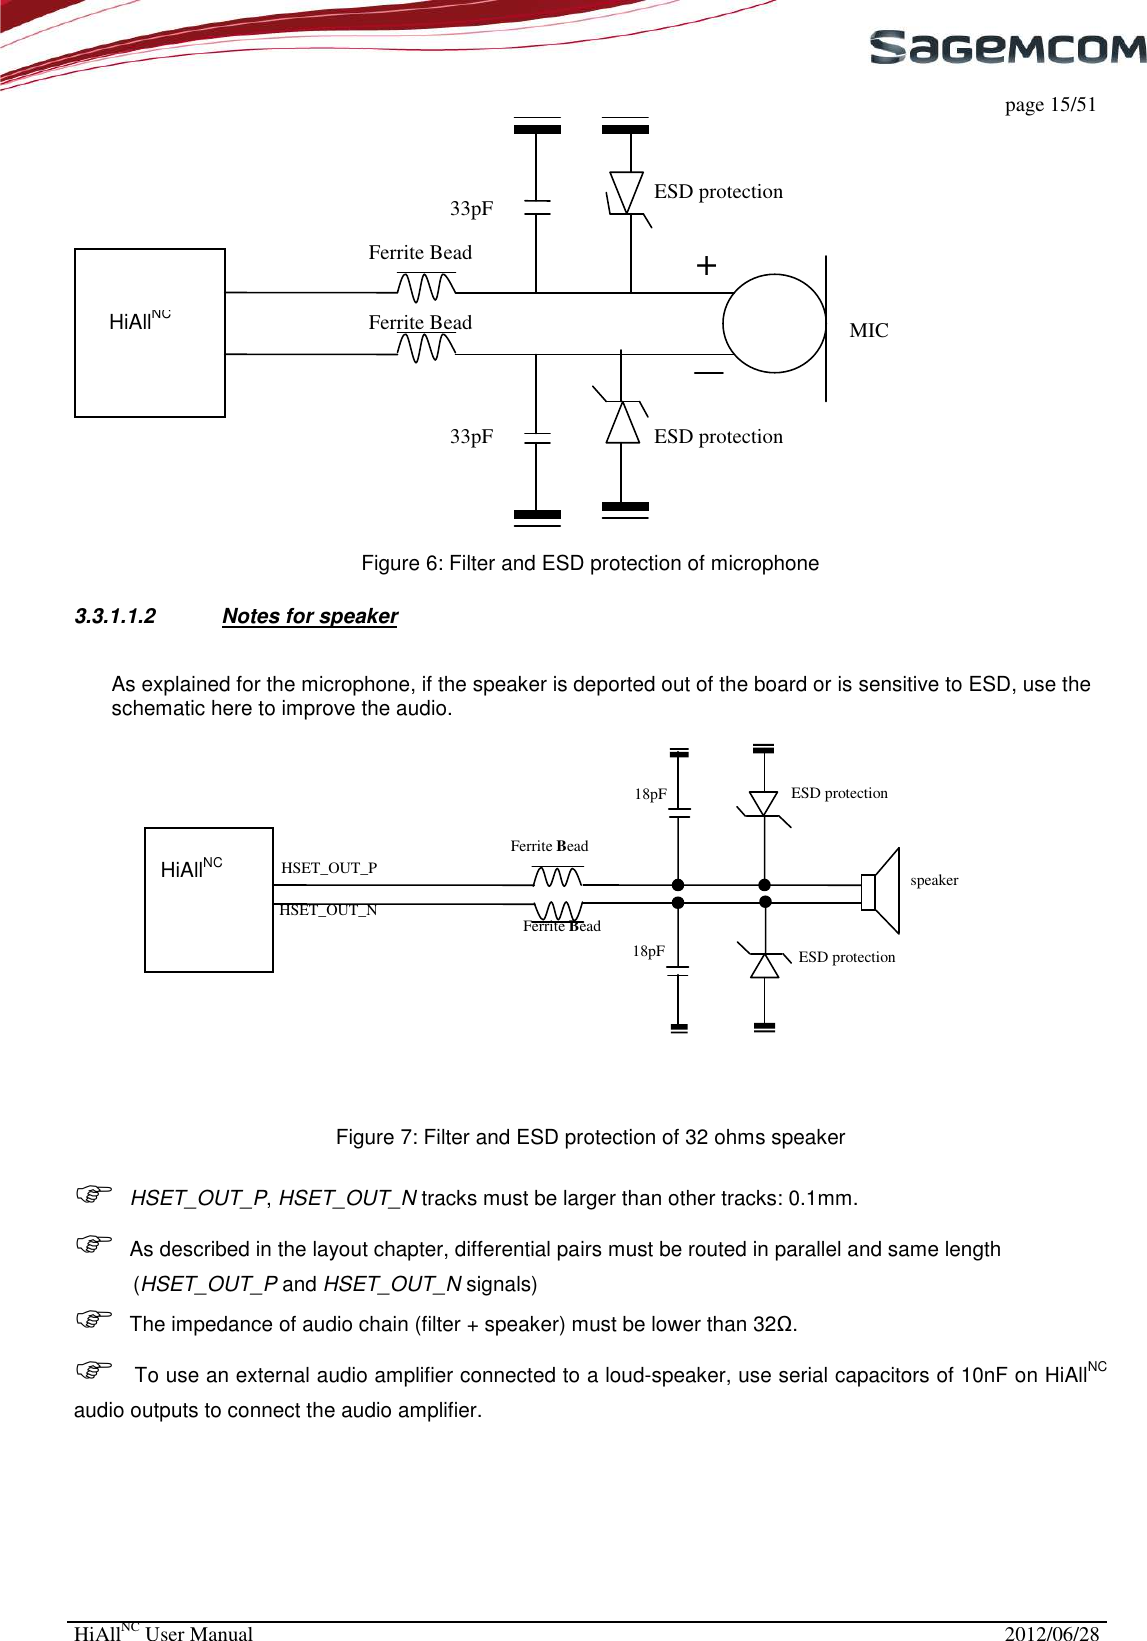     page 15/51 HiAllNC User Manual  2012/06/28    Figure 6: Filter and ESD protection of microphone 3.3.1.1.2  Notes for speaker As explained for the microphone, if the speaker is deported out of the board or is sensitive to ESD, use the schematic here to improve the audio.      Figure 7: Filter and ESD protection of 32 ohms speaker   HSET_OUT_P, HSET_OUT_N tracks must be larger than other tracks: 0.1mm.  As described in the layout chapter, differential pairs must be routed in parallel and same length (HSET_OUT_P and HSET_OUT_N signals)  The impedance of audio chain (filter + speaker) must be lower than 32Ω.  To use an external audio amplifier connected to a loud-speaker, use serial capacitors of 10nF on HiAllNC audio outputs to connect the audio amplifier. MIC 33pF 33pF Ferrite Bead Ferrite Bead + ESD protection ESD protection HiAllNC  HiAllNC  HSET_OUT_P HSET_OUT_N speaker Ferrite Bead Ferrite Bead 18pF 18pF ESD protection ESD protection 